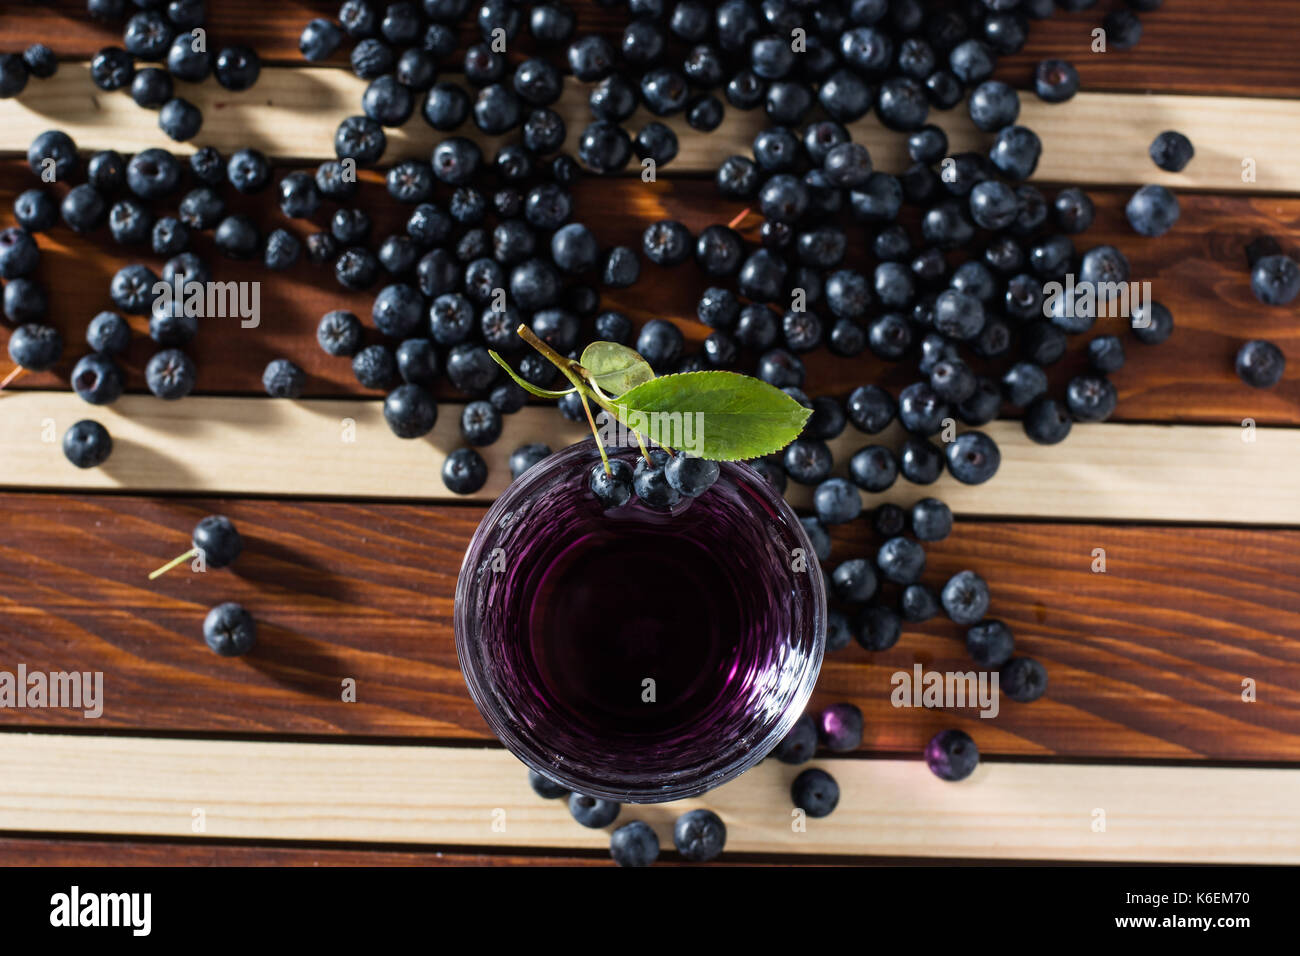 Aronia spilled on wooden table with glass of aronia juice Stock Photo